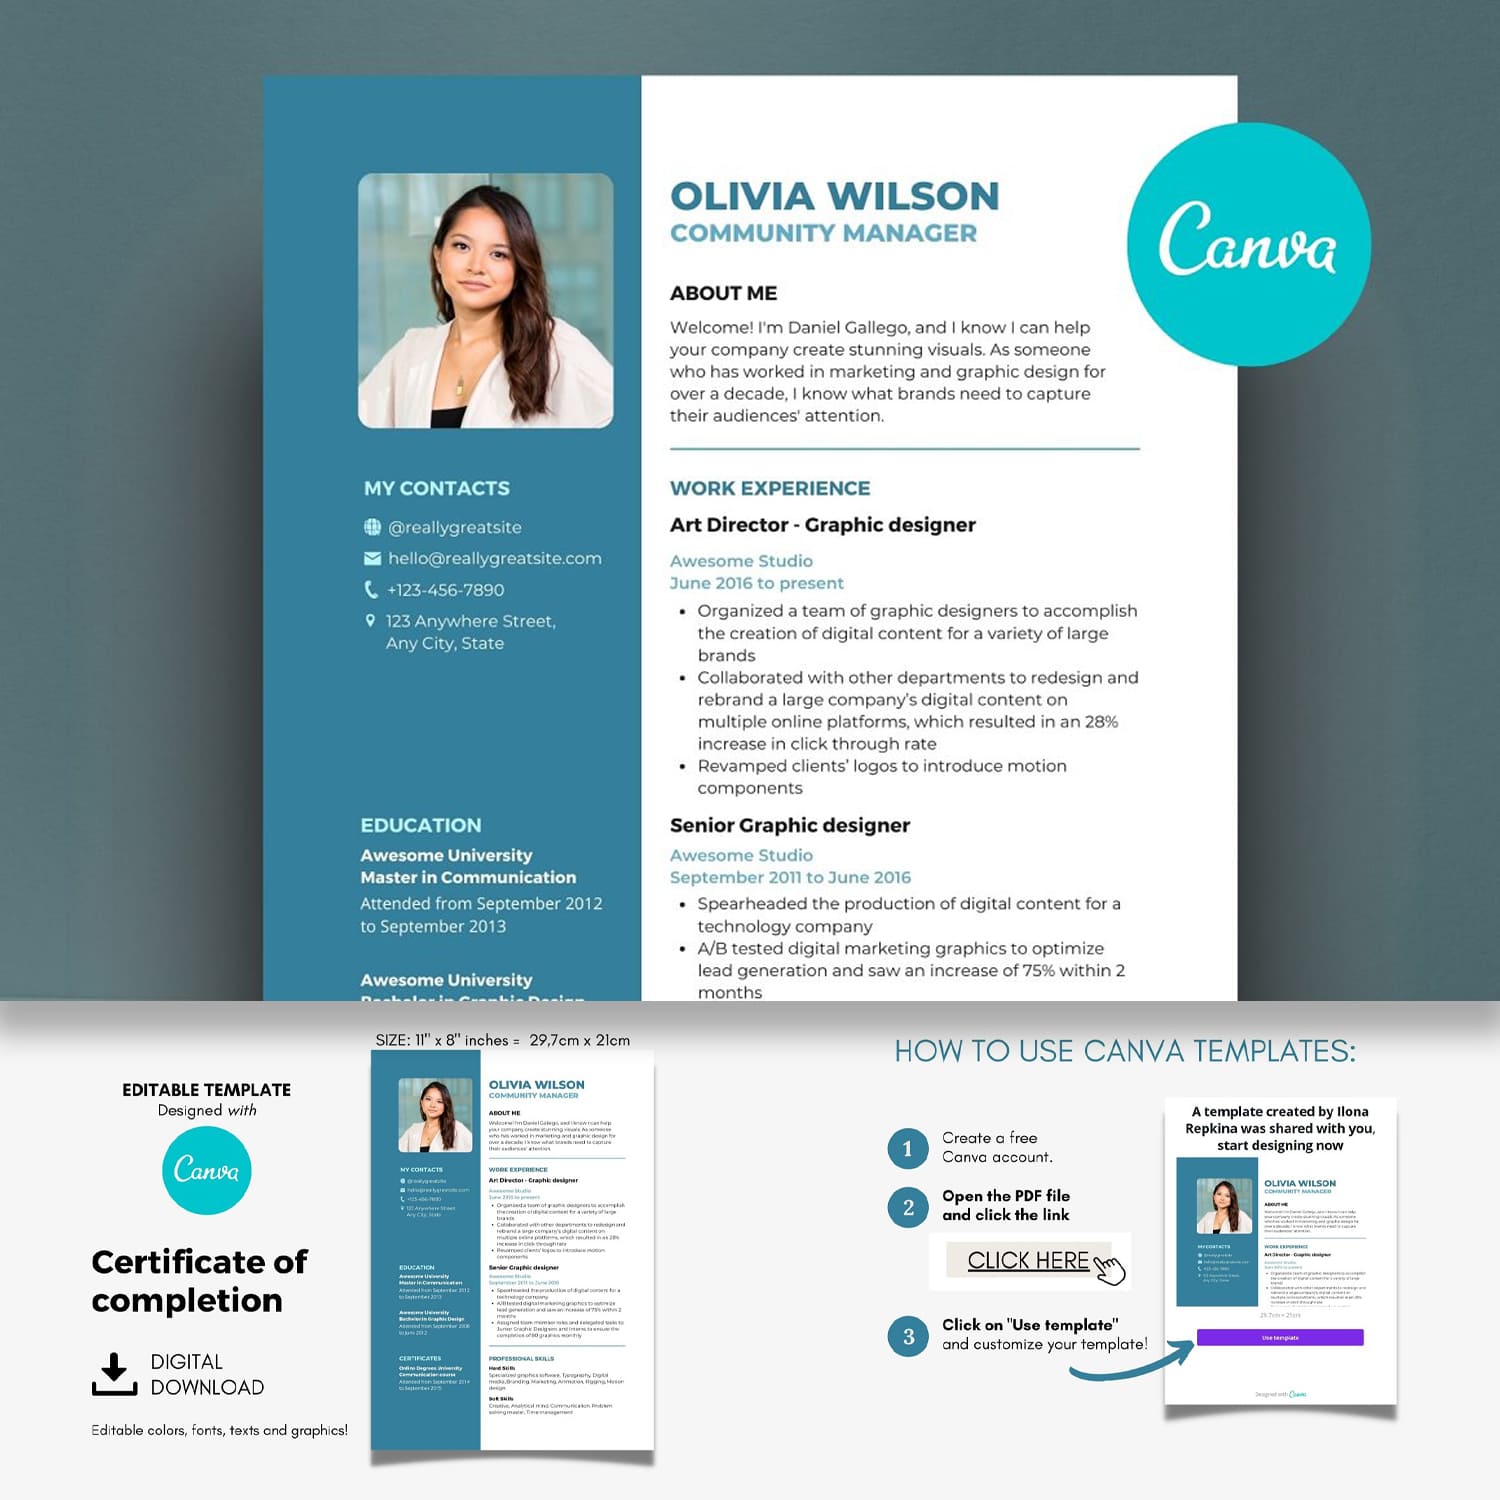 Resume Canva Template, Printable A4 - main image preview.